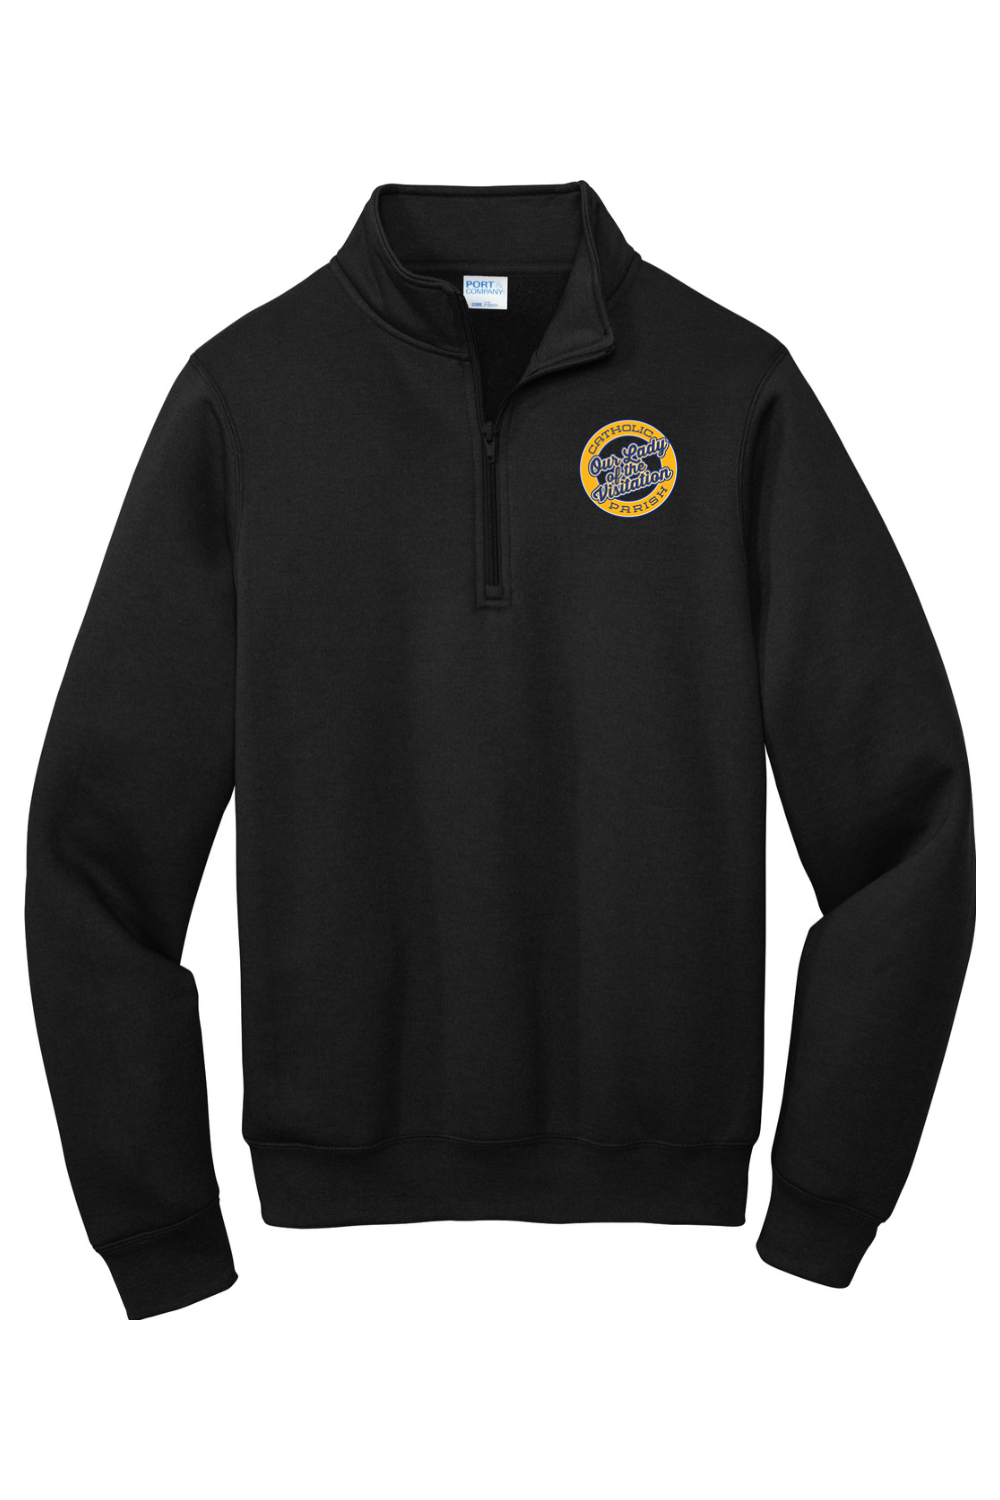 Our Lady of the Visitation Circle Left Chest Quarter Zip